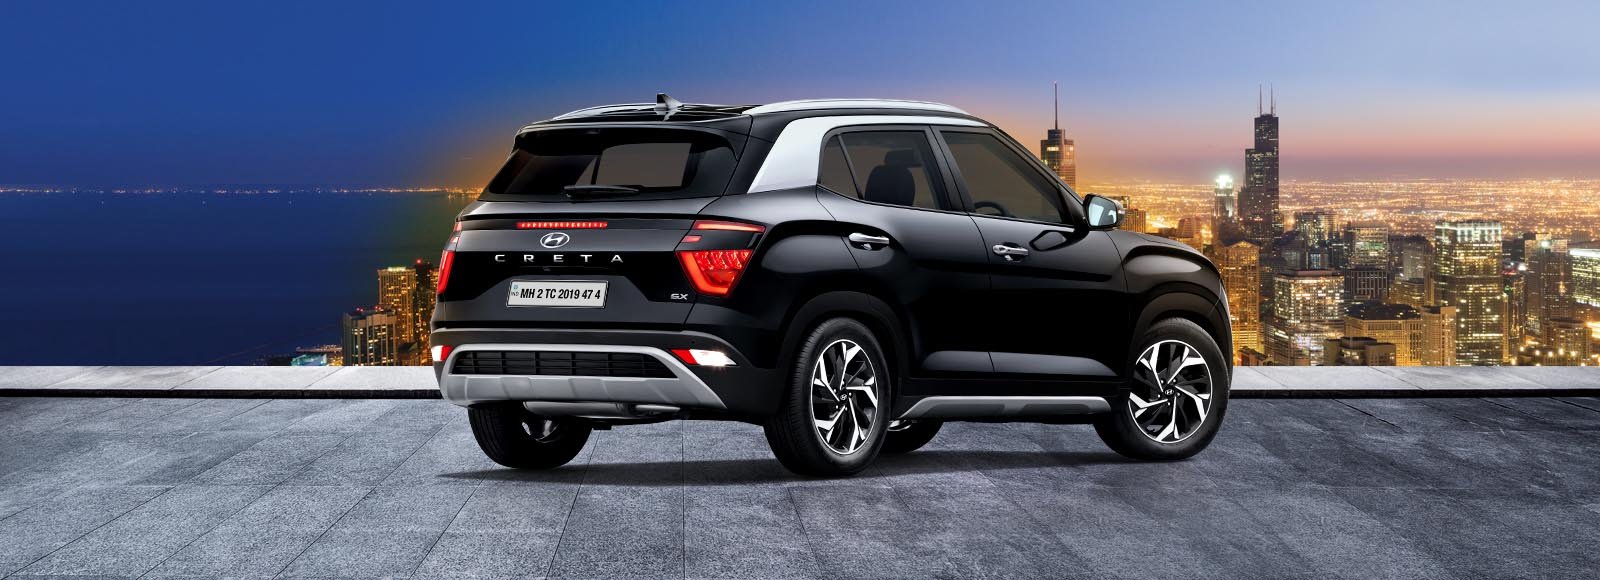 Over 6,700 Units of Hyundai Creta Dispatched to Dealerships Before Lockdown